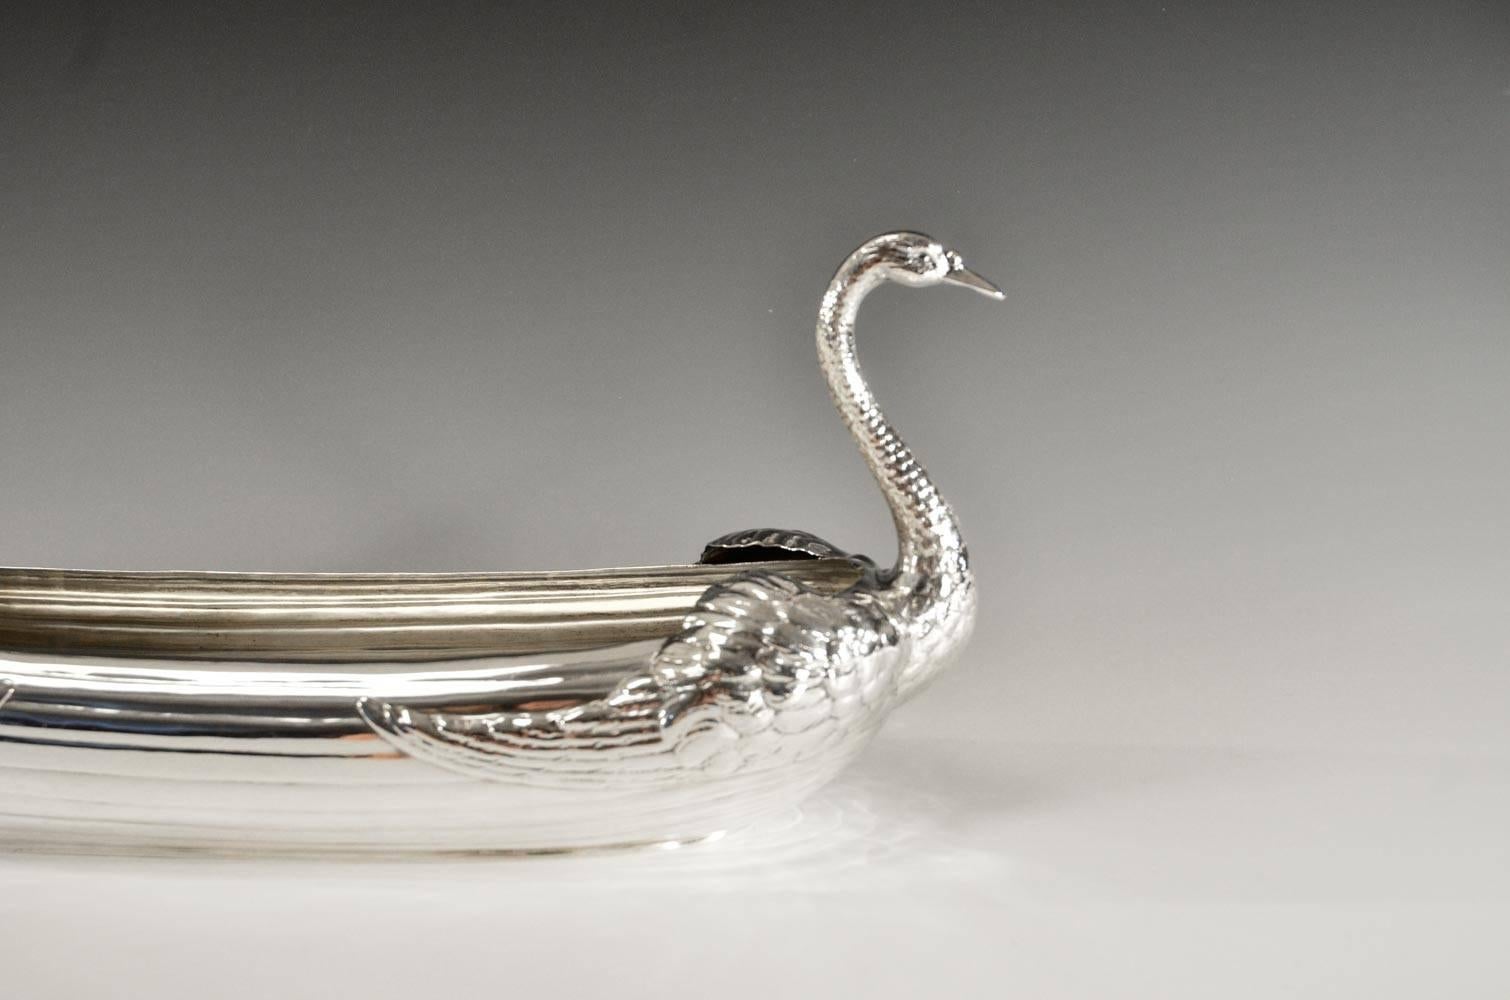 Signed with the Gorham and Durgin mark, this rare sterling silver centerpiece features a double swan boat design. Reminiscent of the Boston commons boats, the double swans decorate either end with elegant sweeping necks and the open body allows for